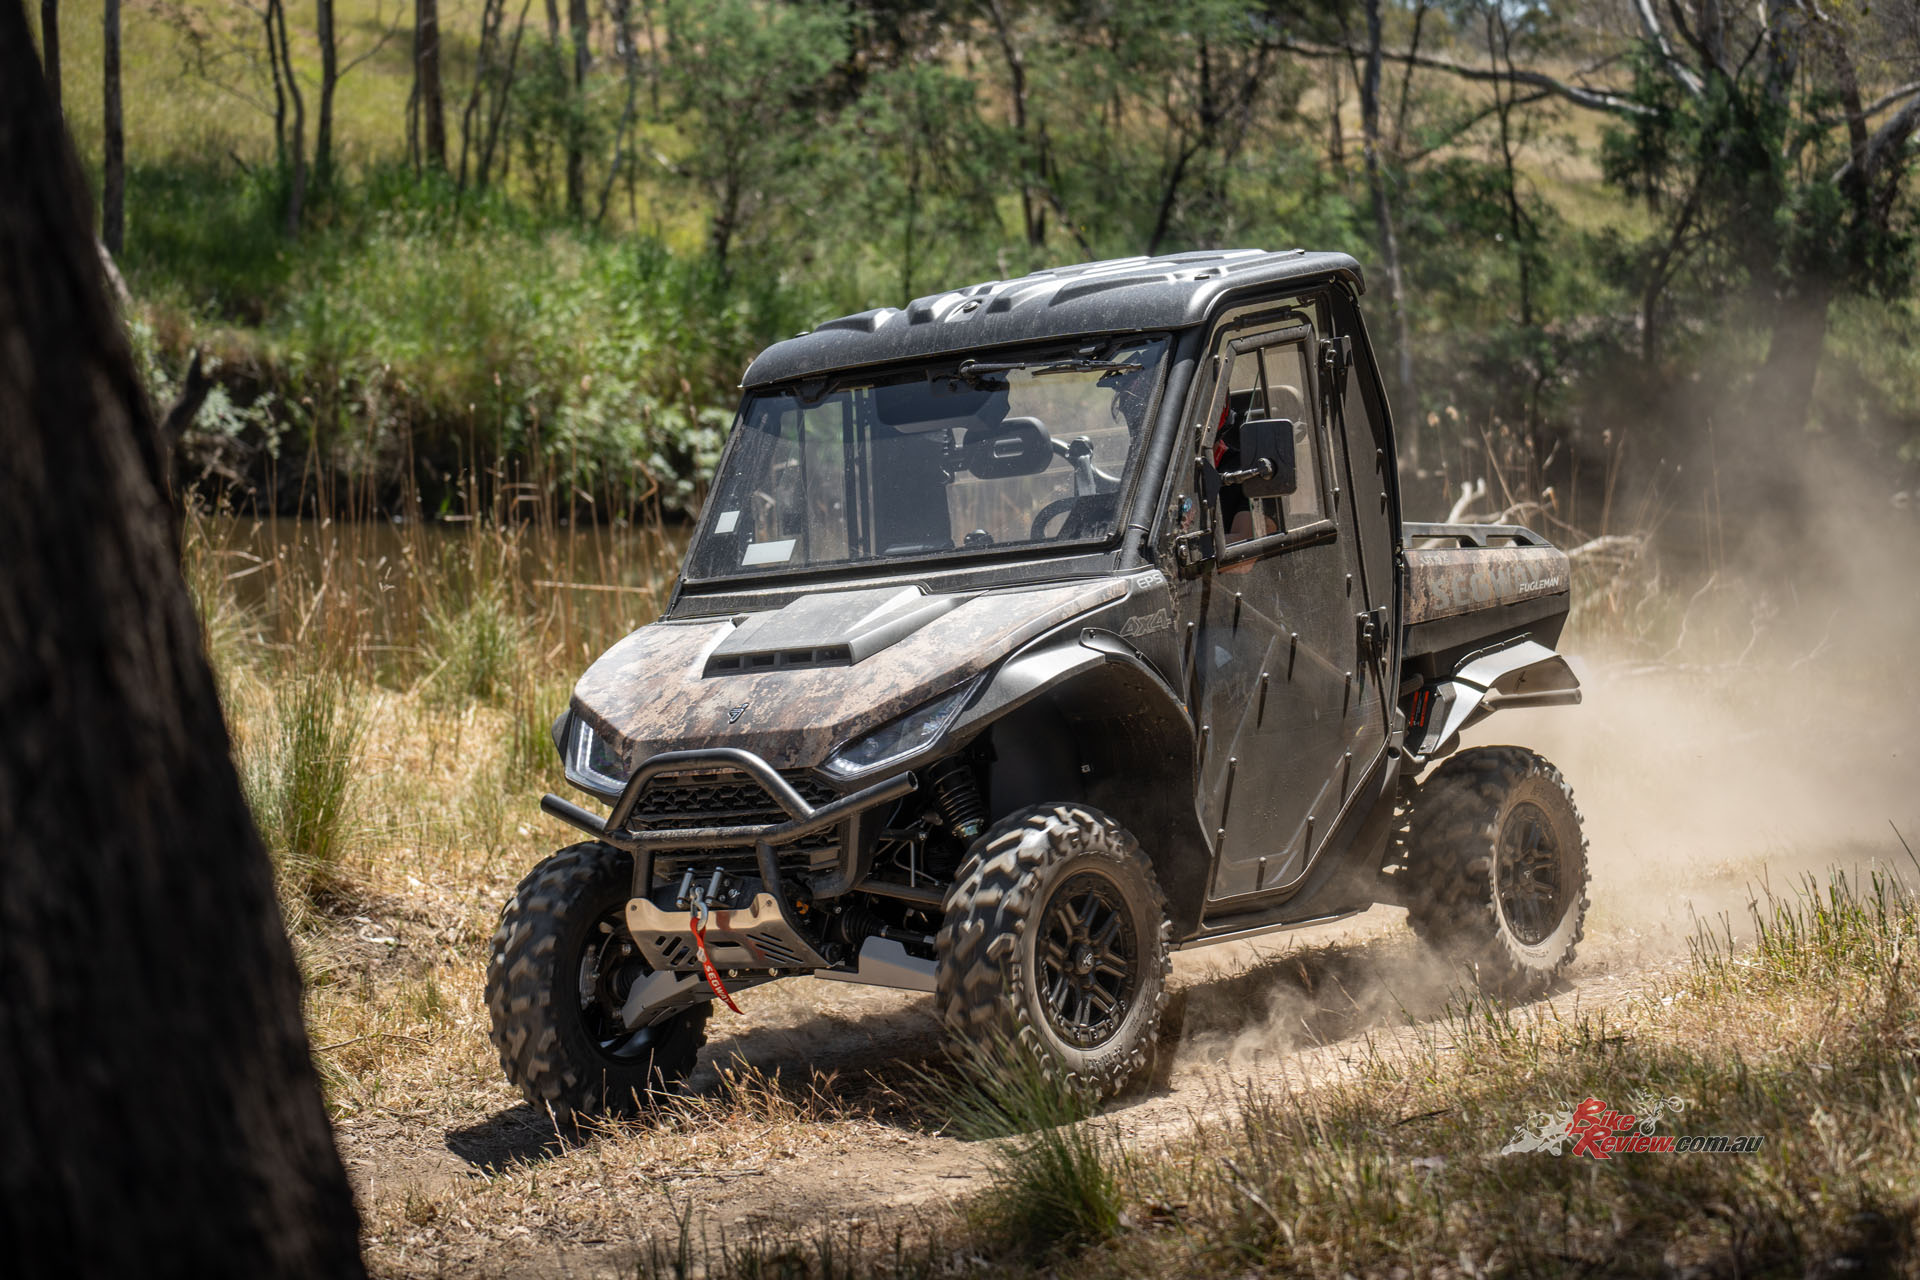 The UT10 comes with the same motor as the UT10 CREW, four-wheels disc brakes, adjustable oil shocks, rear tipper tray with 680kg payload, a winch, various door options.